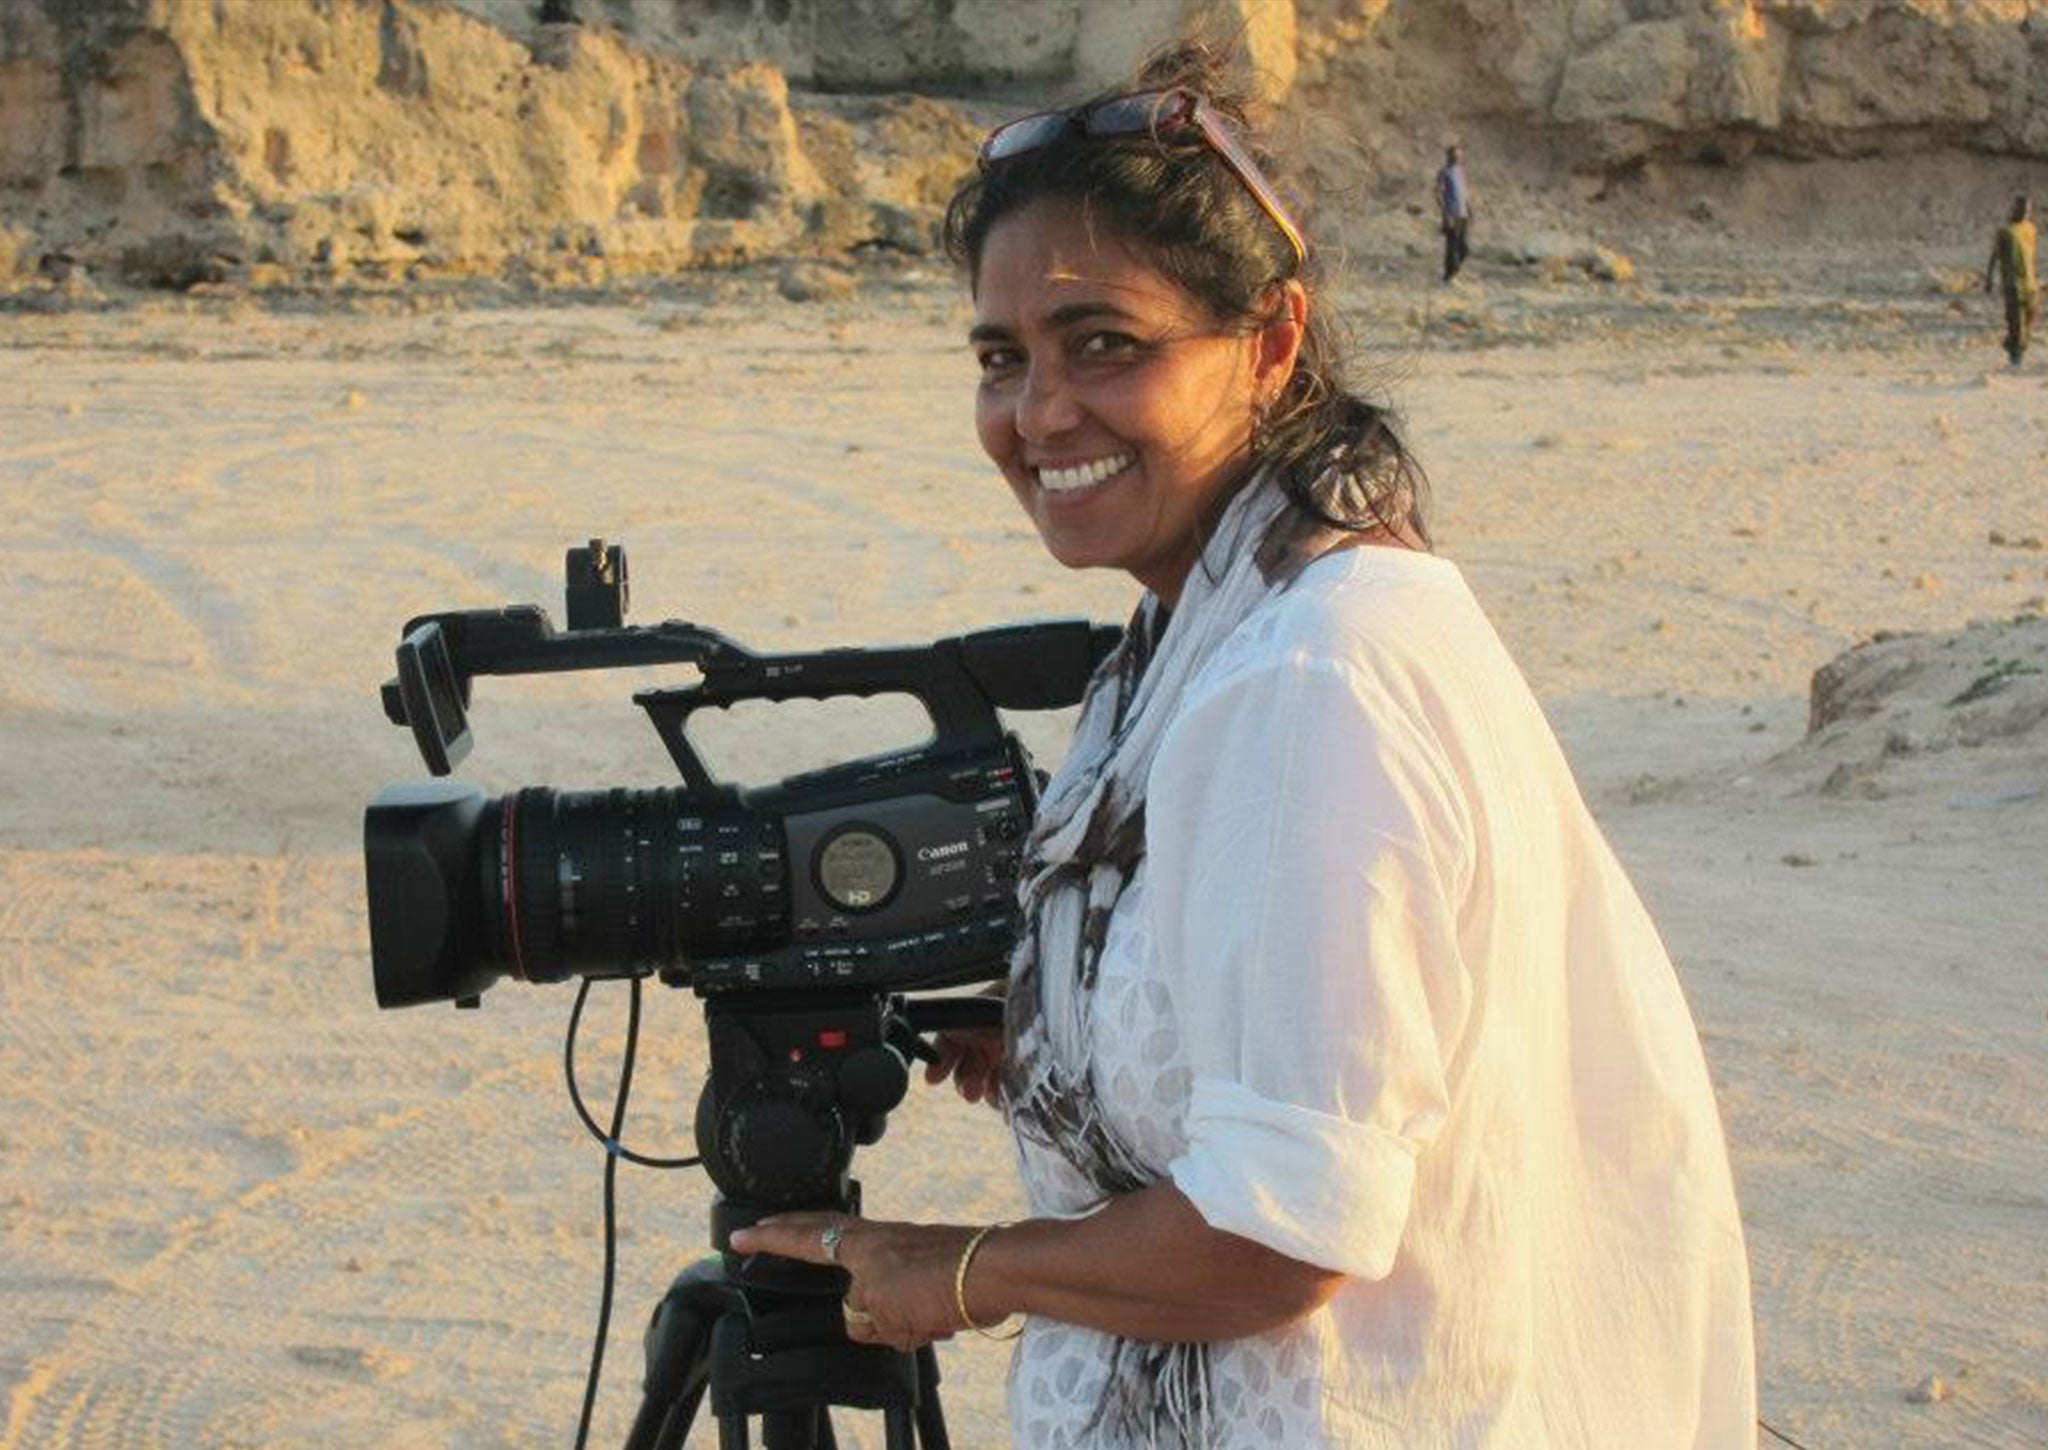 Ruhi Hamid has been working as a freelance producer/director for 14 years